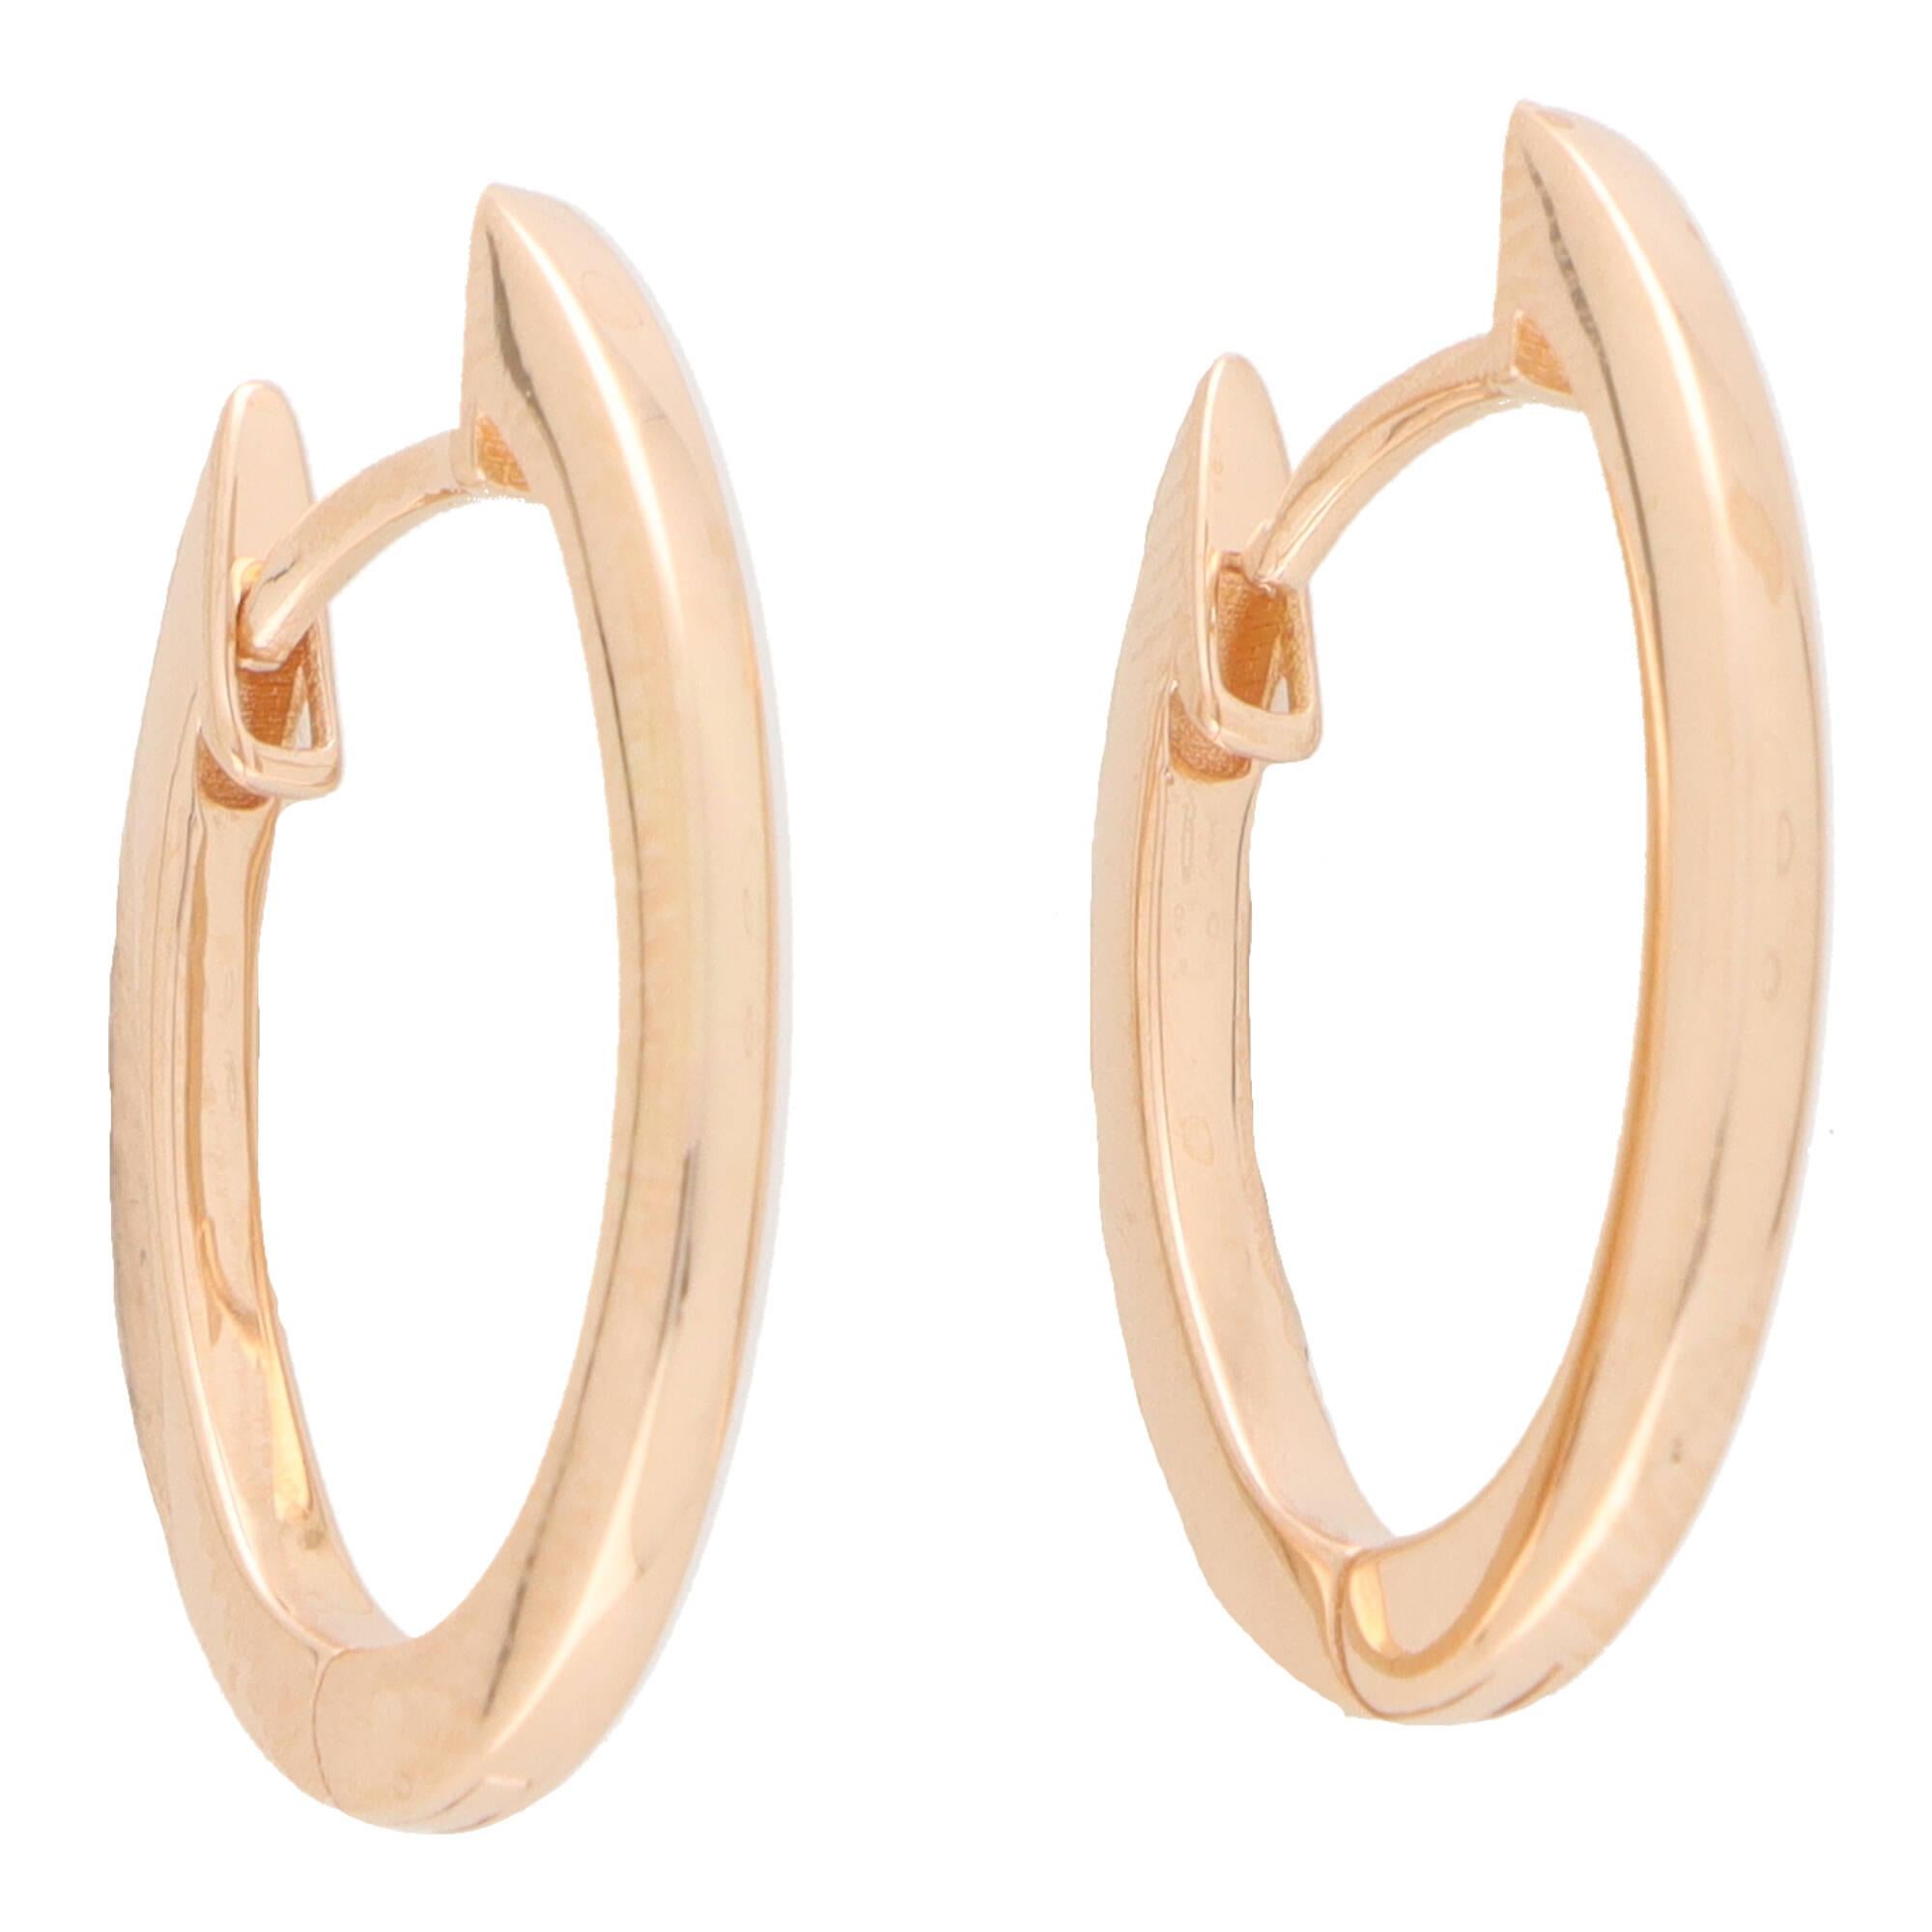 A perfect everyday pair of solid gold hoop earrings set in 18k rose gold.

These fabulous hoops are composed of an oval hoop design and are secured to reverse with a secure post and click fitting.

Due to the size and design these hoops would be a